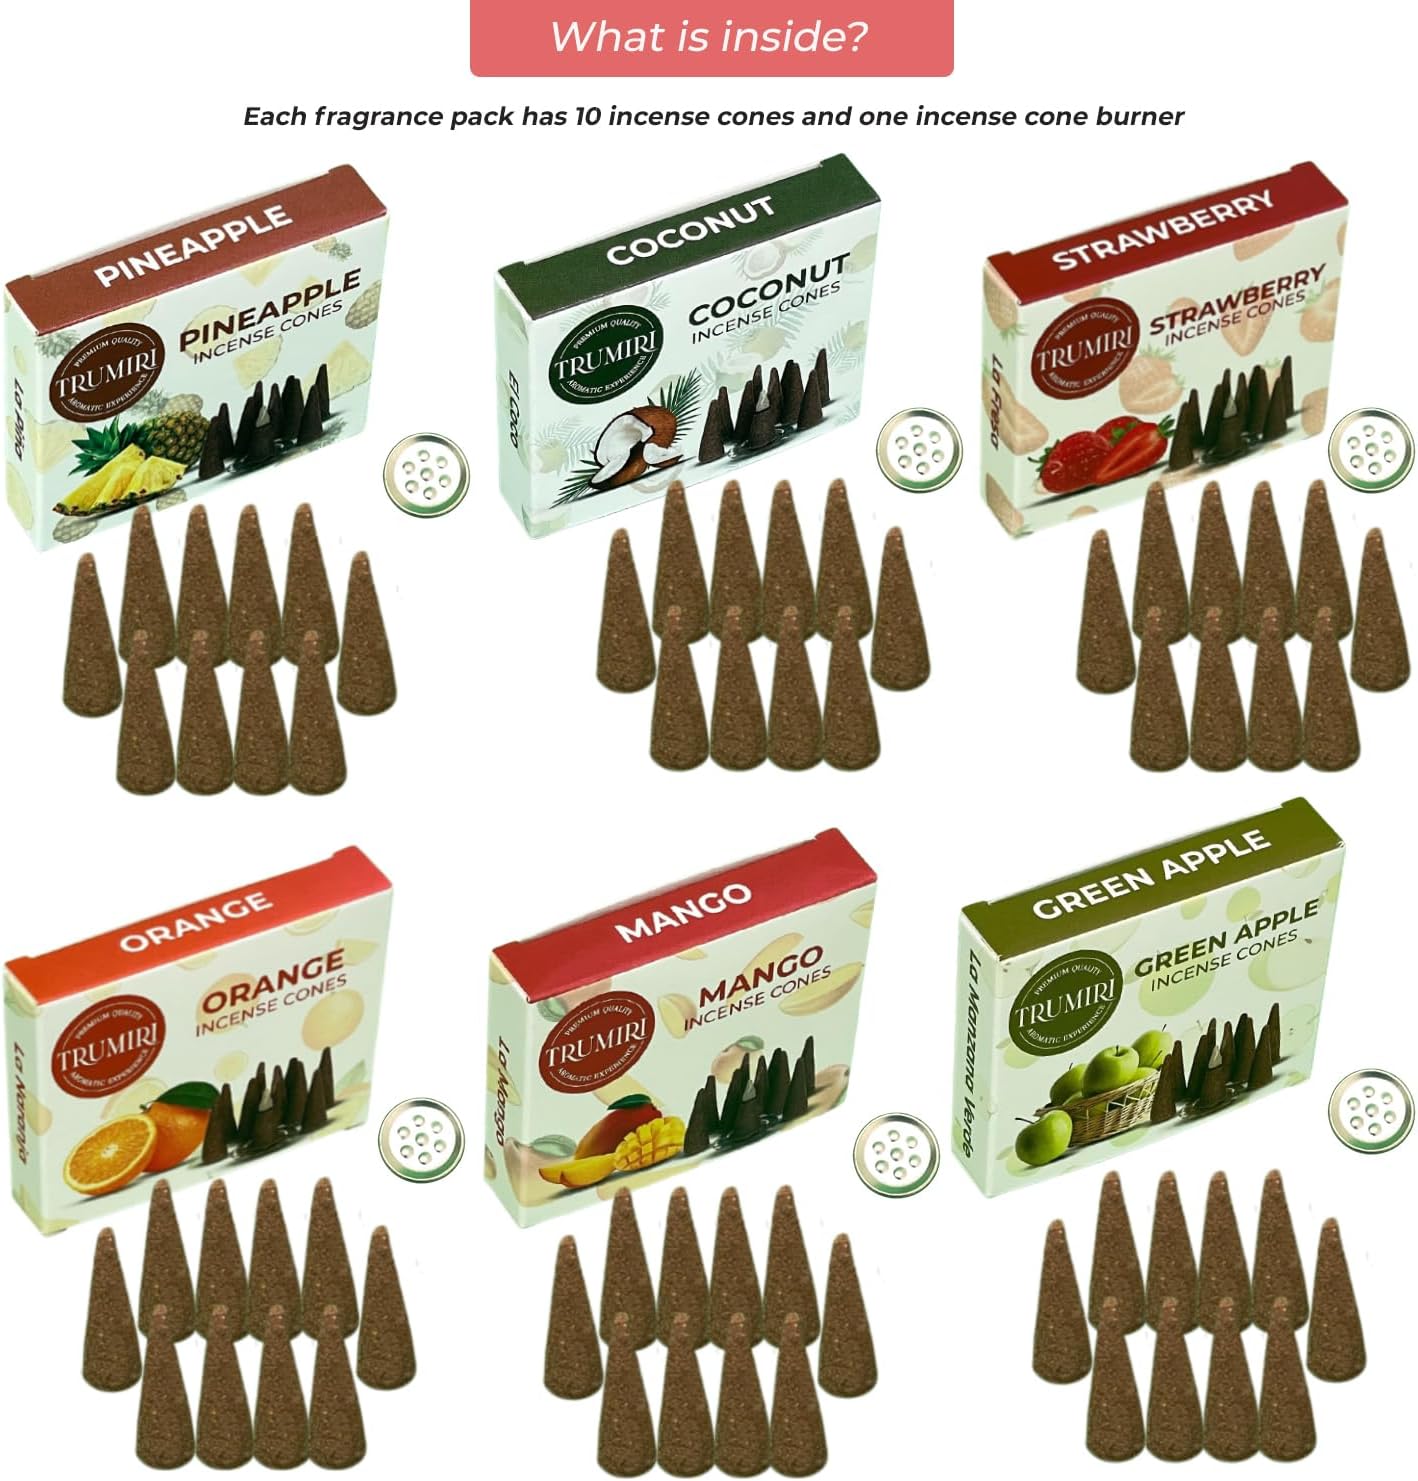 Trumiri Fruity Scents Incense Cones Variety Pack of 6 Scents with 10 Cones per Scent - Total 60 Cones